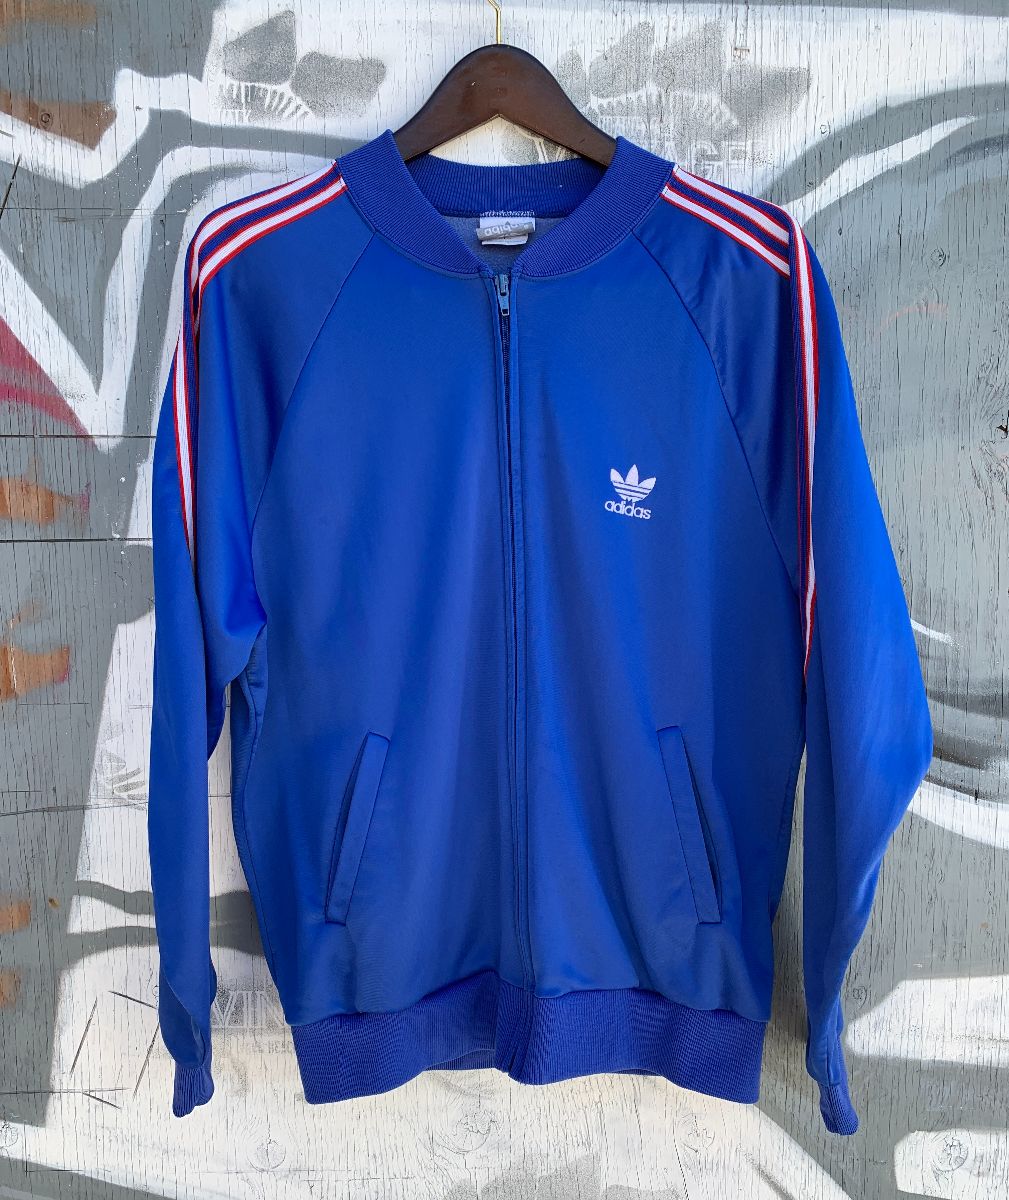 product details: MADE IN USA ADIDAS BLUE ZIP UP TRACK JACKET RED STRIPED SLEEVES photo